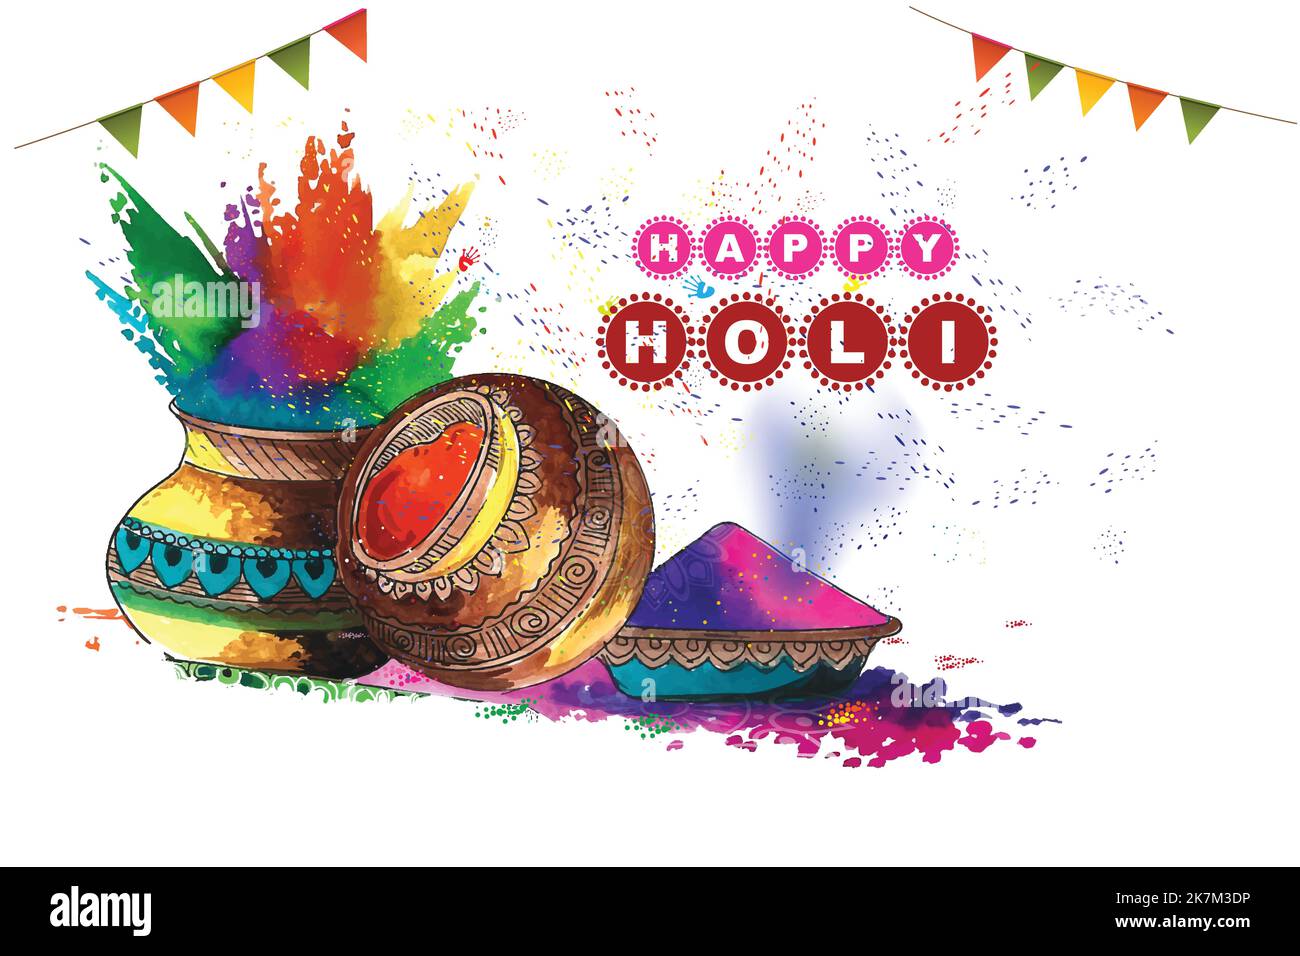 Holi festival india Stock Vector Images - Alamy